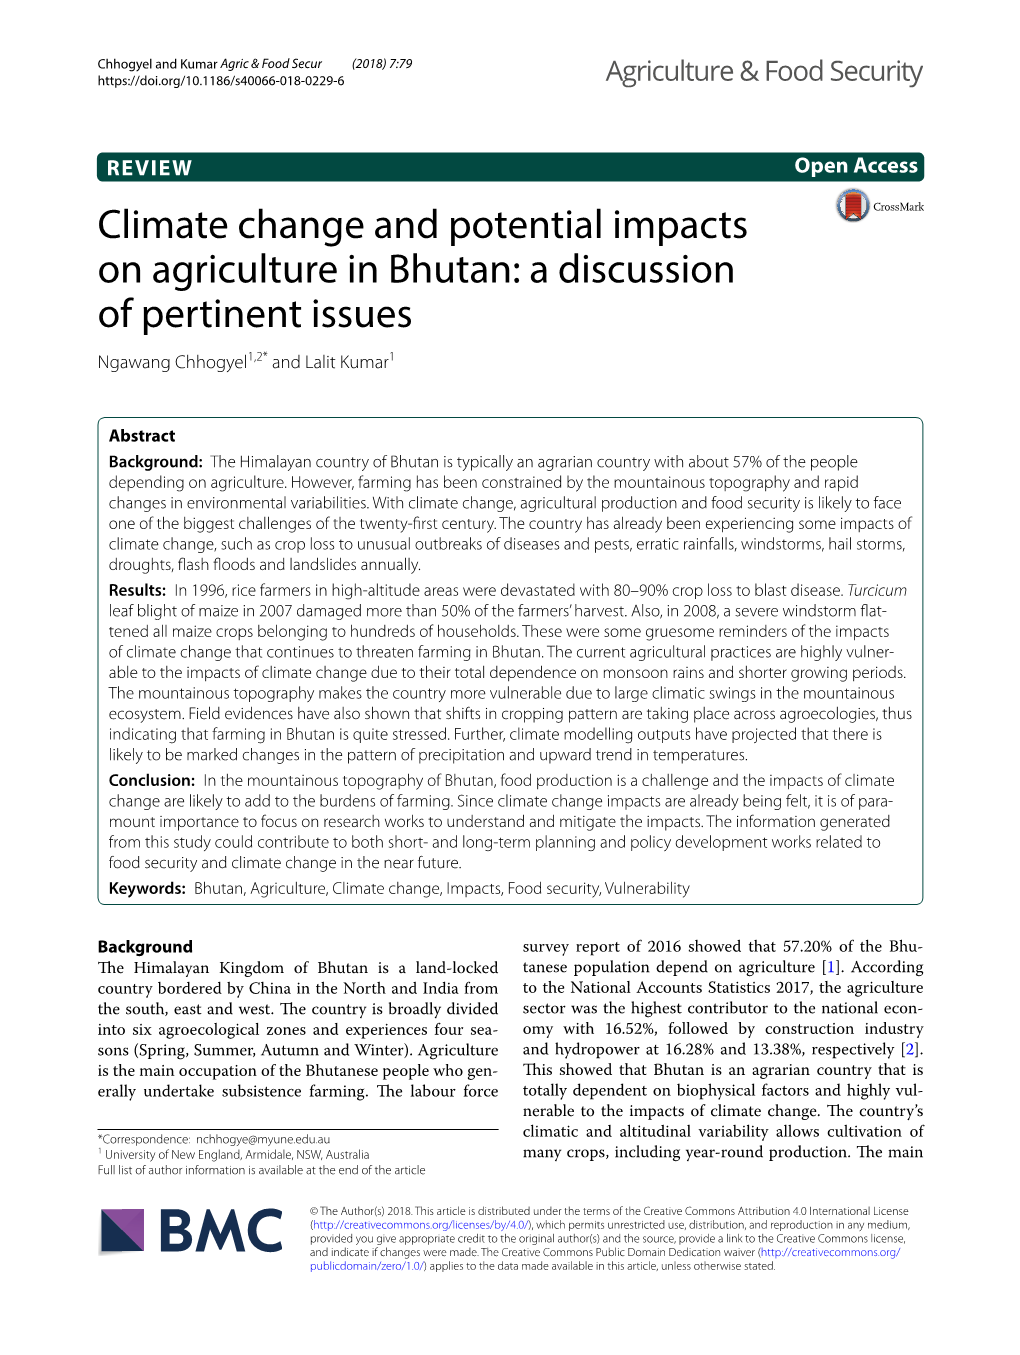 Climate Change and Potential Impacts on Agriculture in Bhutan: a Discussion of Pertinent Issues Ngawang Chhogyel1,2* and Lalit Kumar1